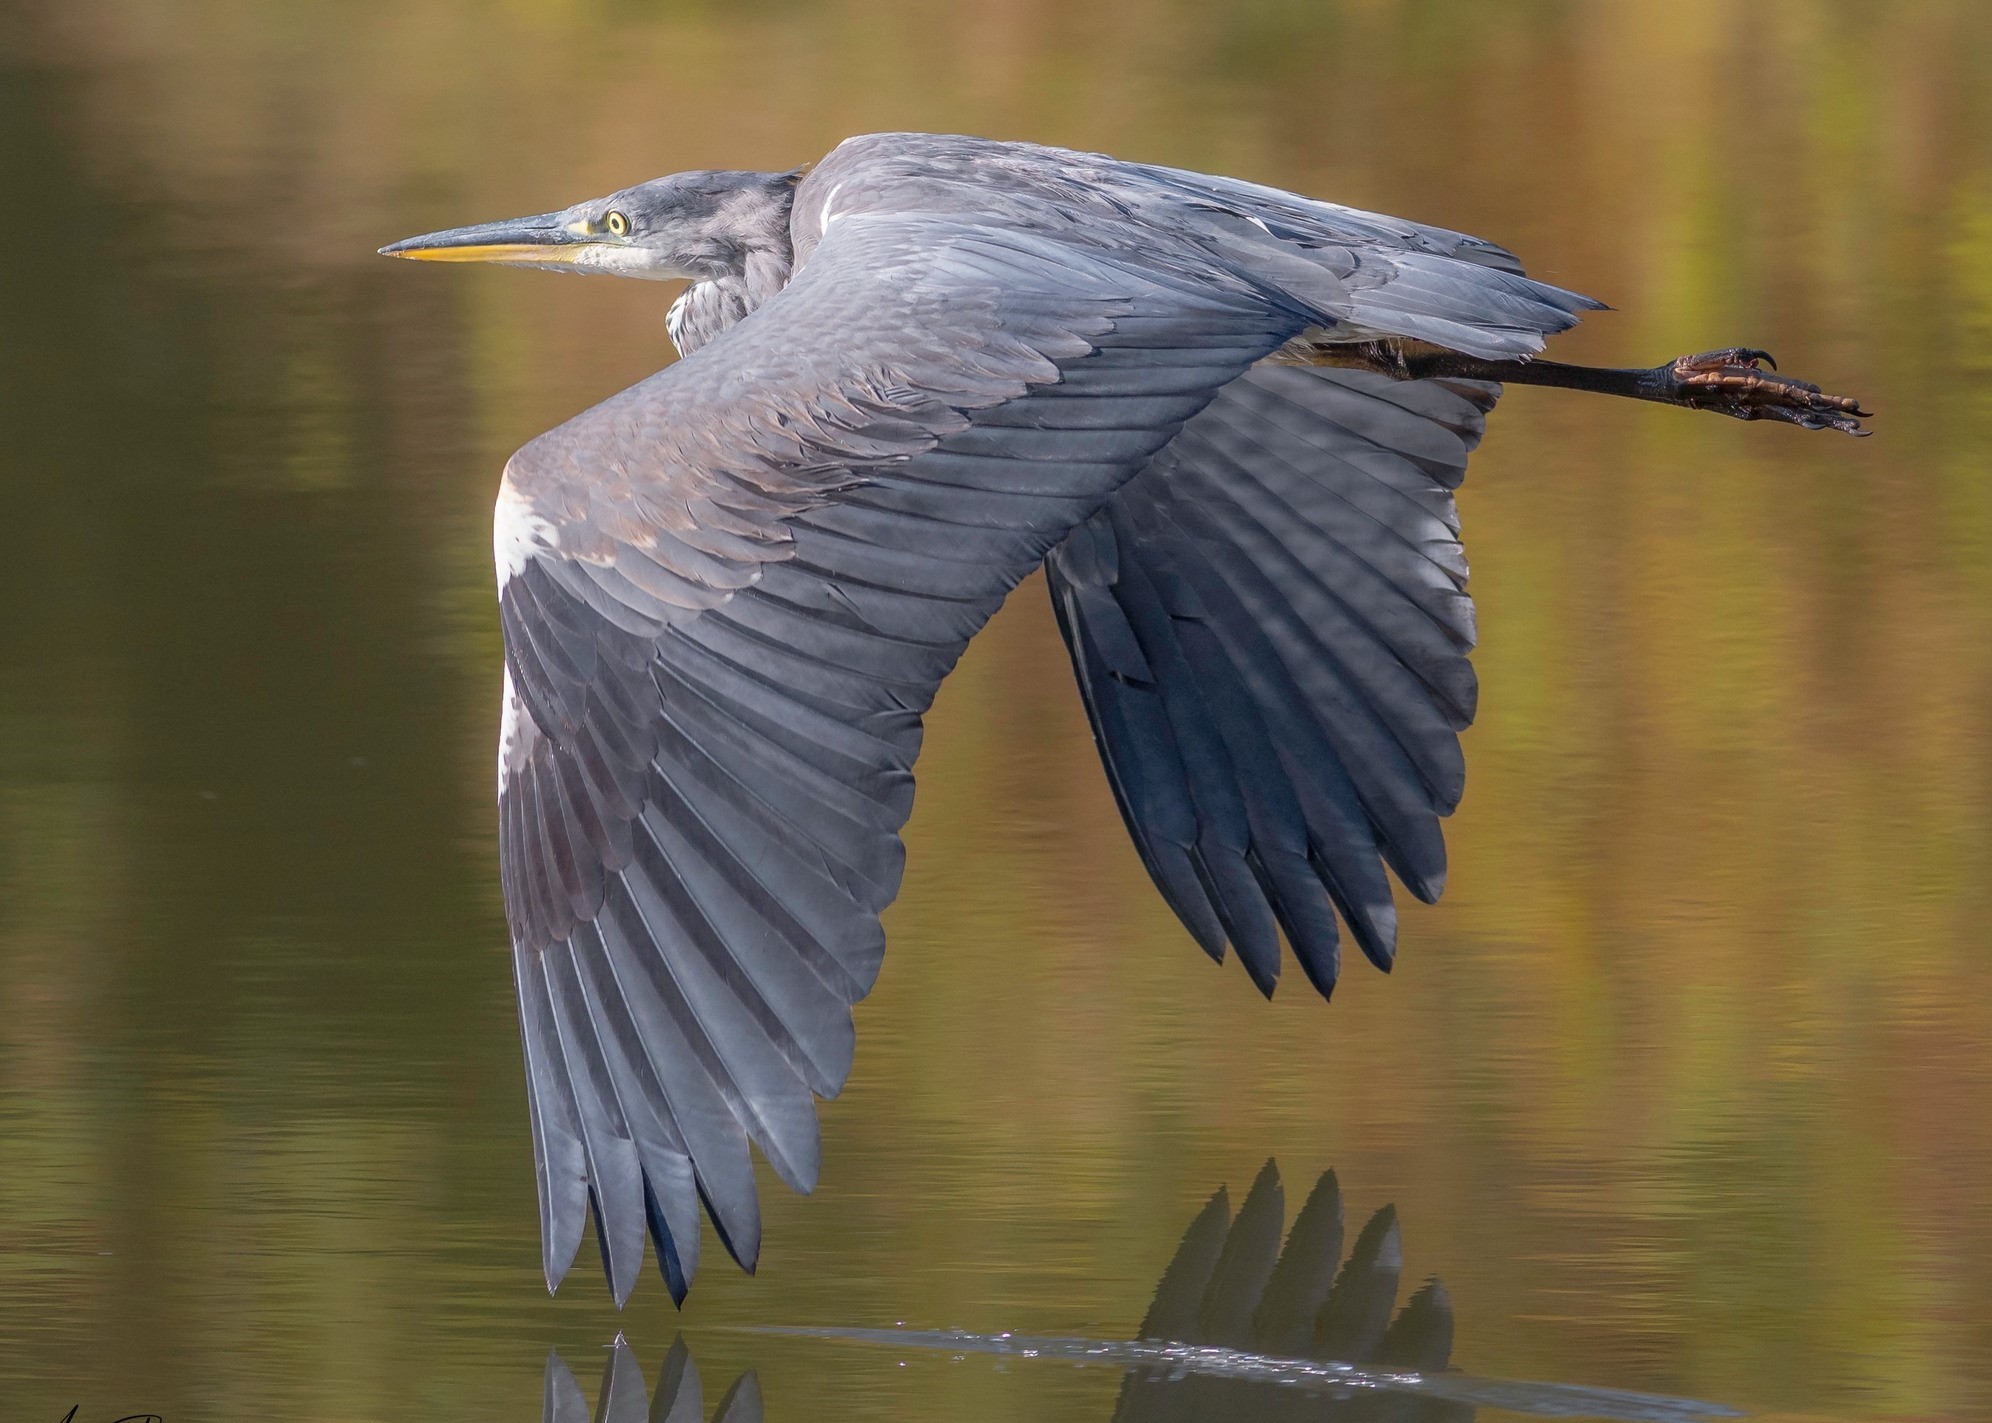 Low flying heron by Alan Bailey